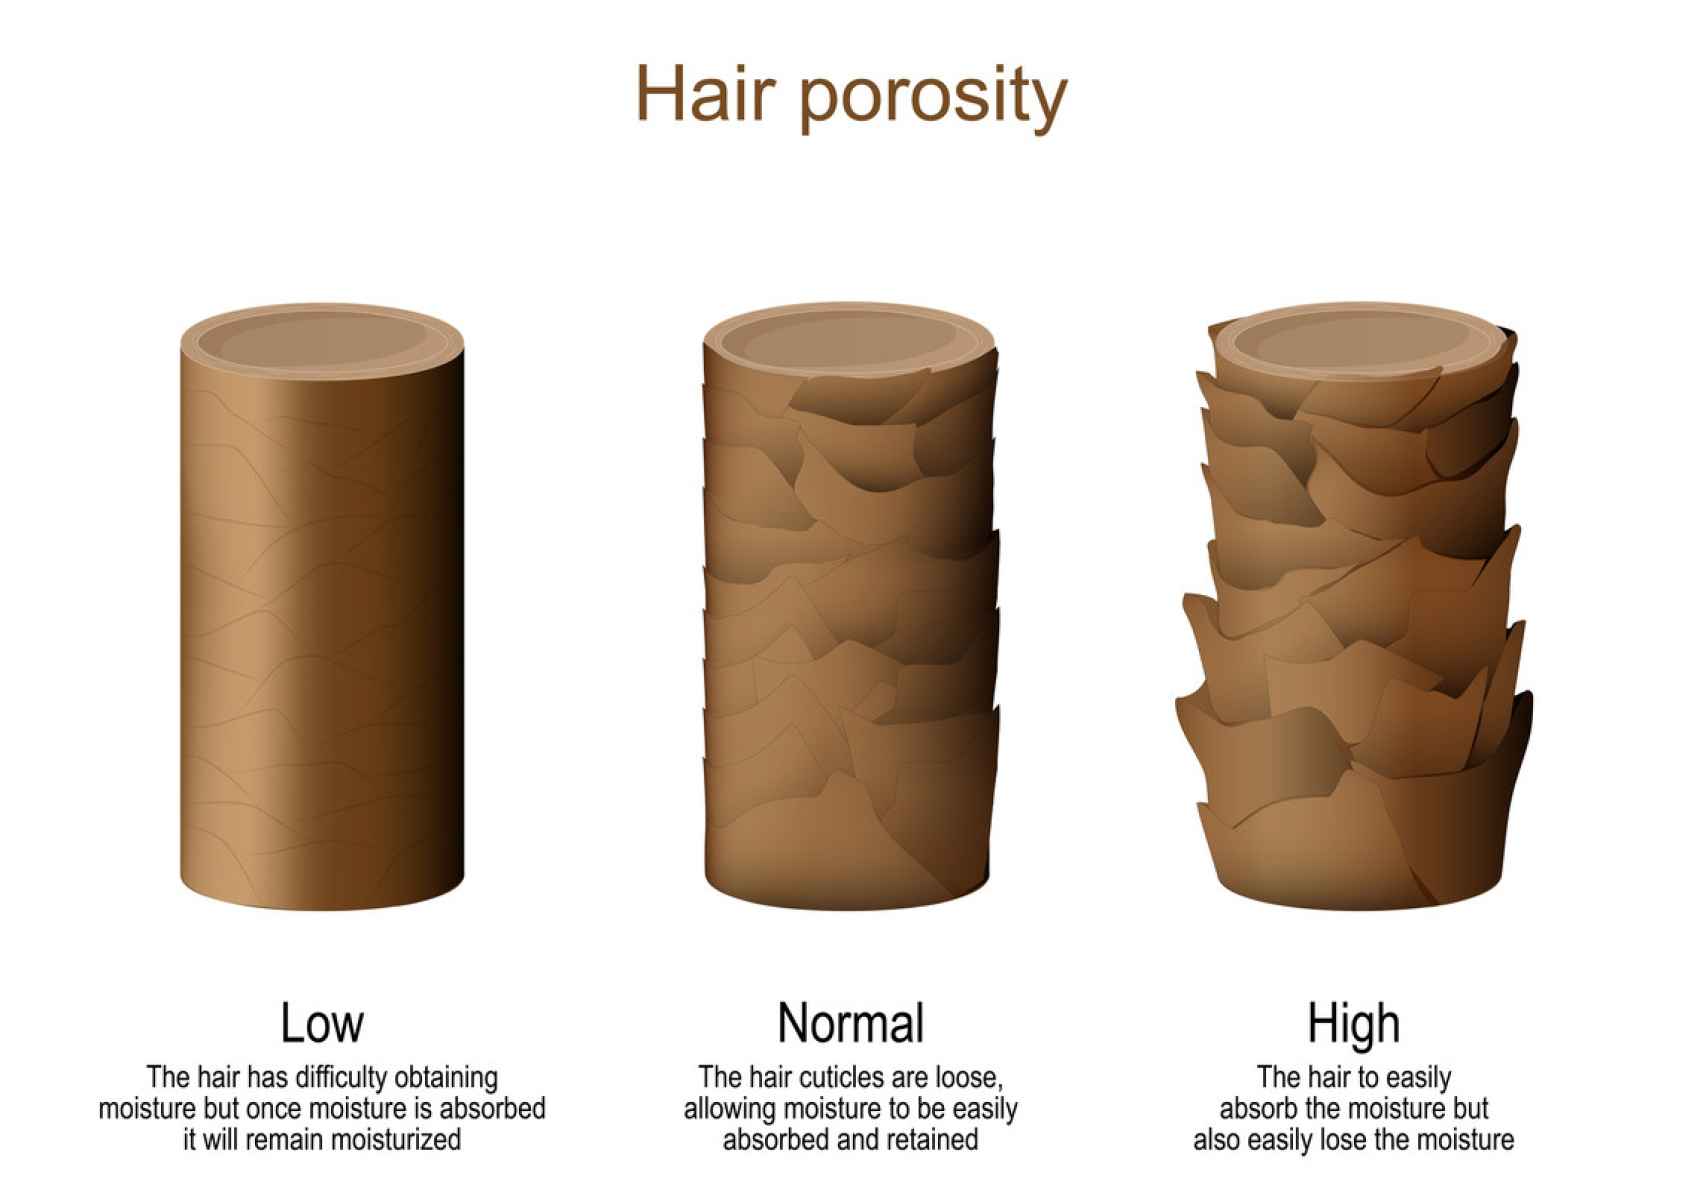 Drawing hair with different levels of porosity.